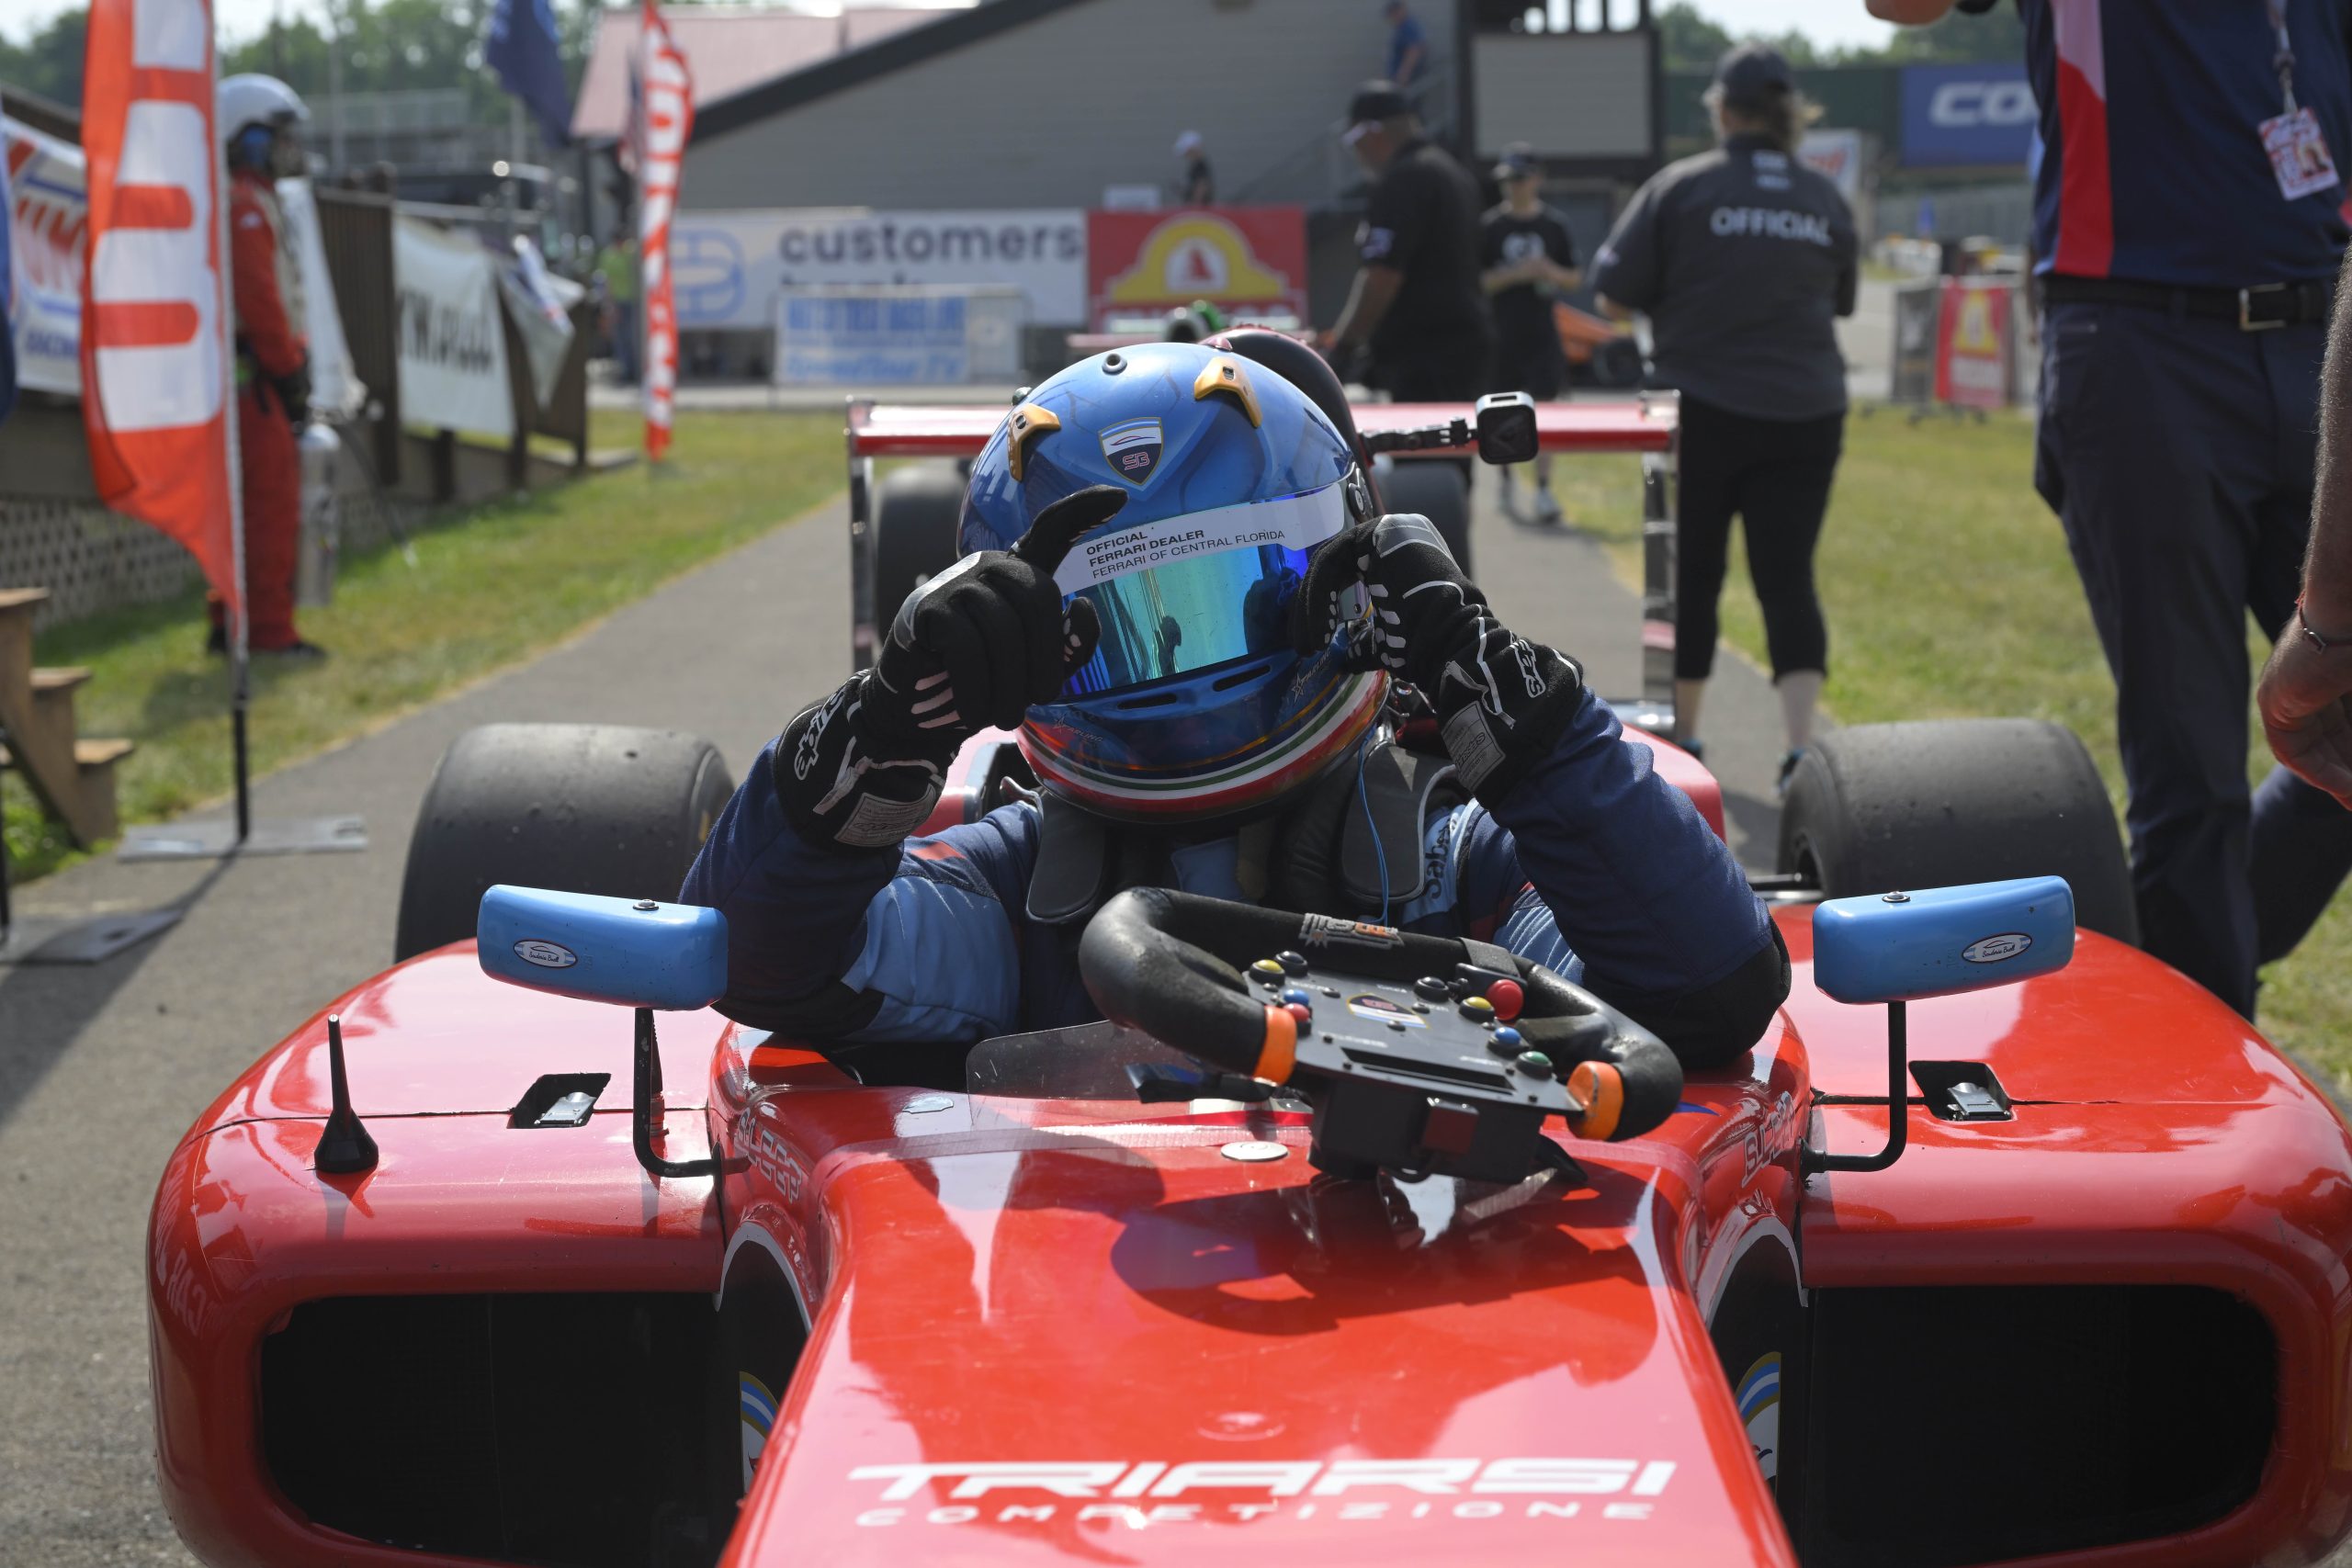 Teddy Musella Takes the Win in Race 1 at Mid-Ohio SpeedTour